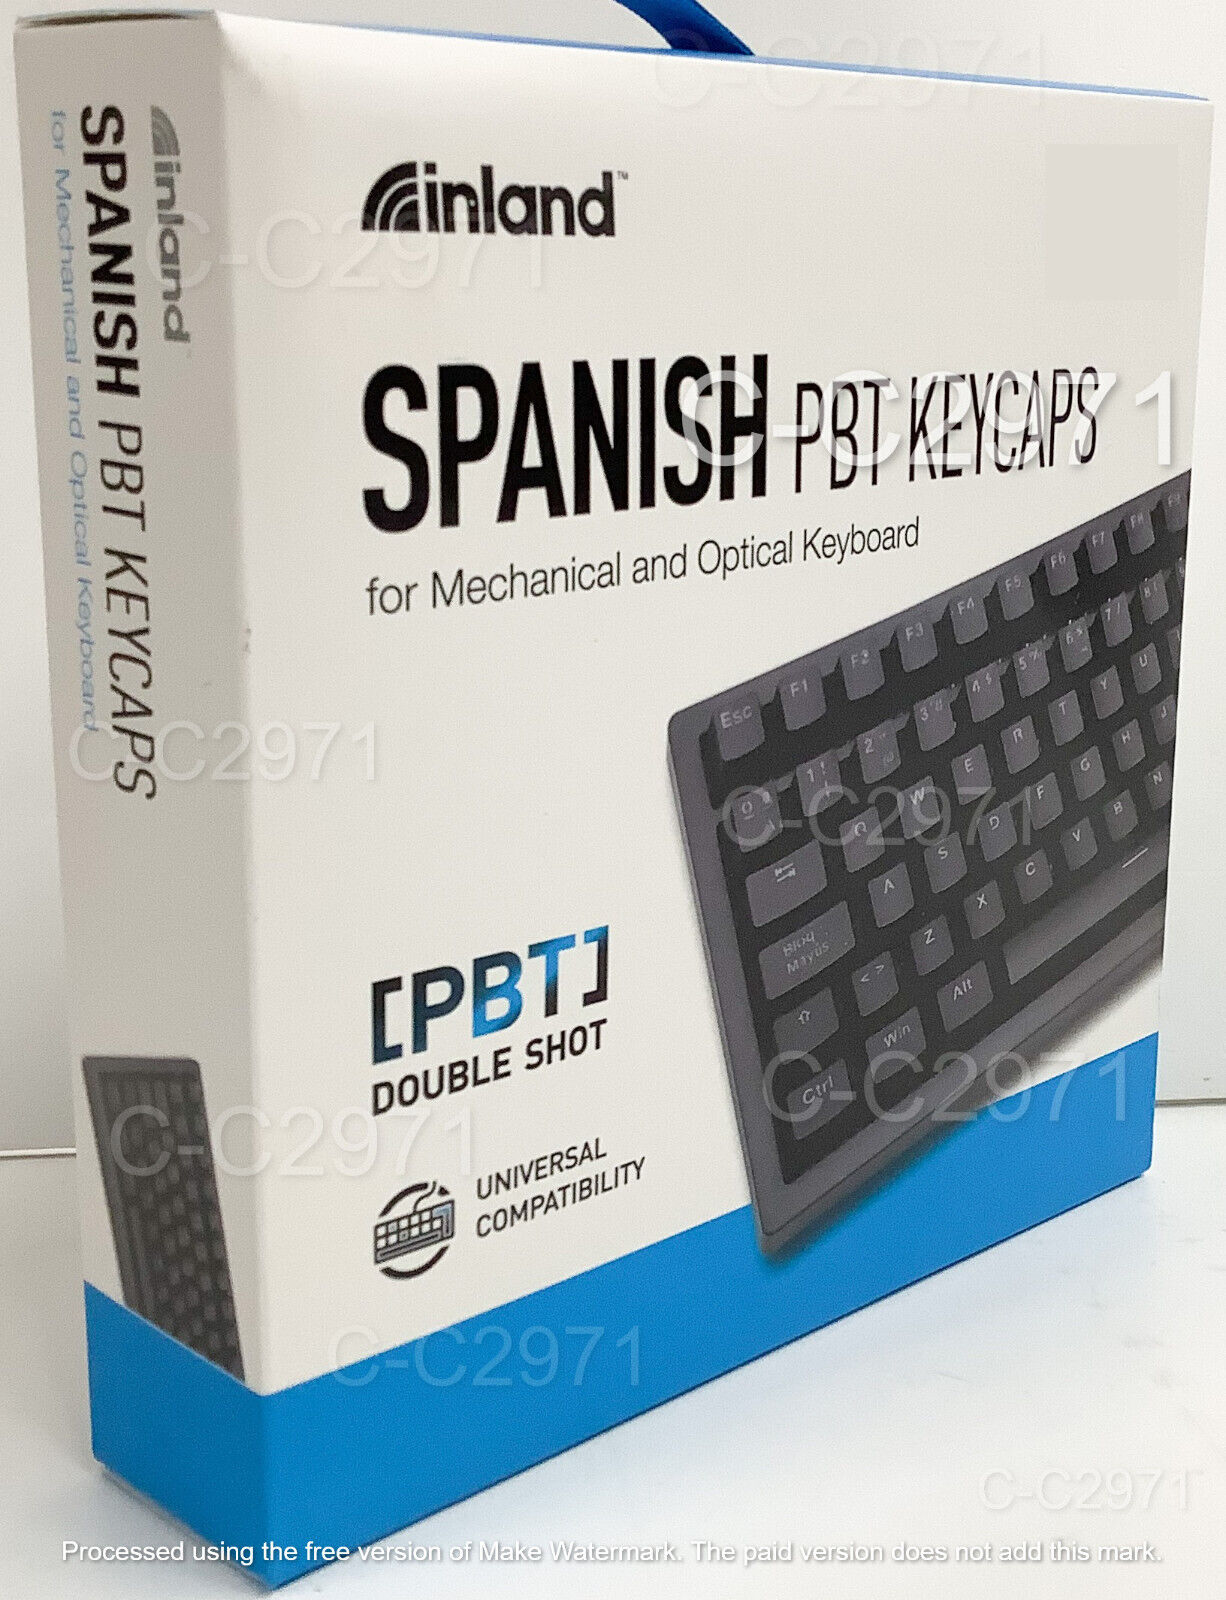 Inland Spanish French German PBT Keycaps for Mechanical and Optical Keyboard NEW